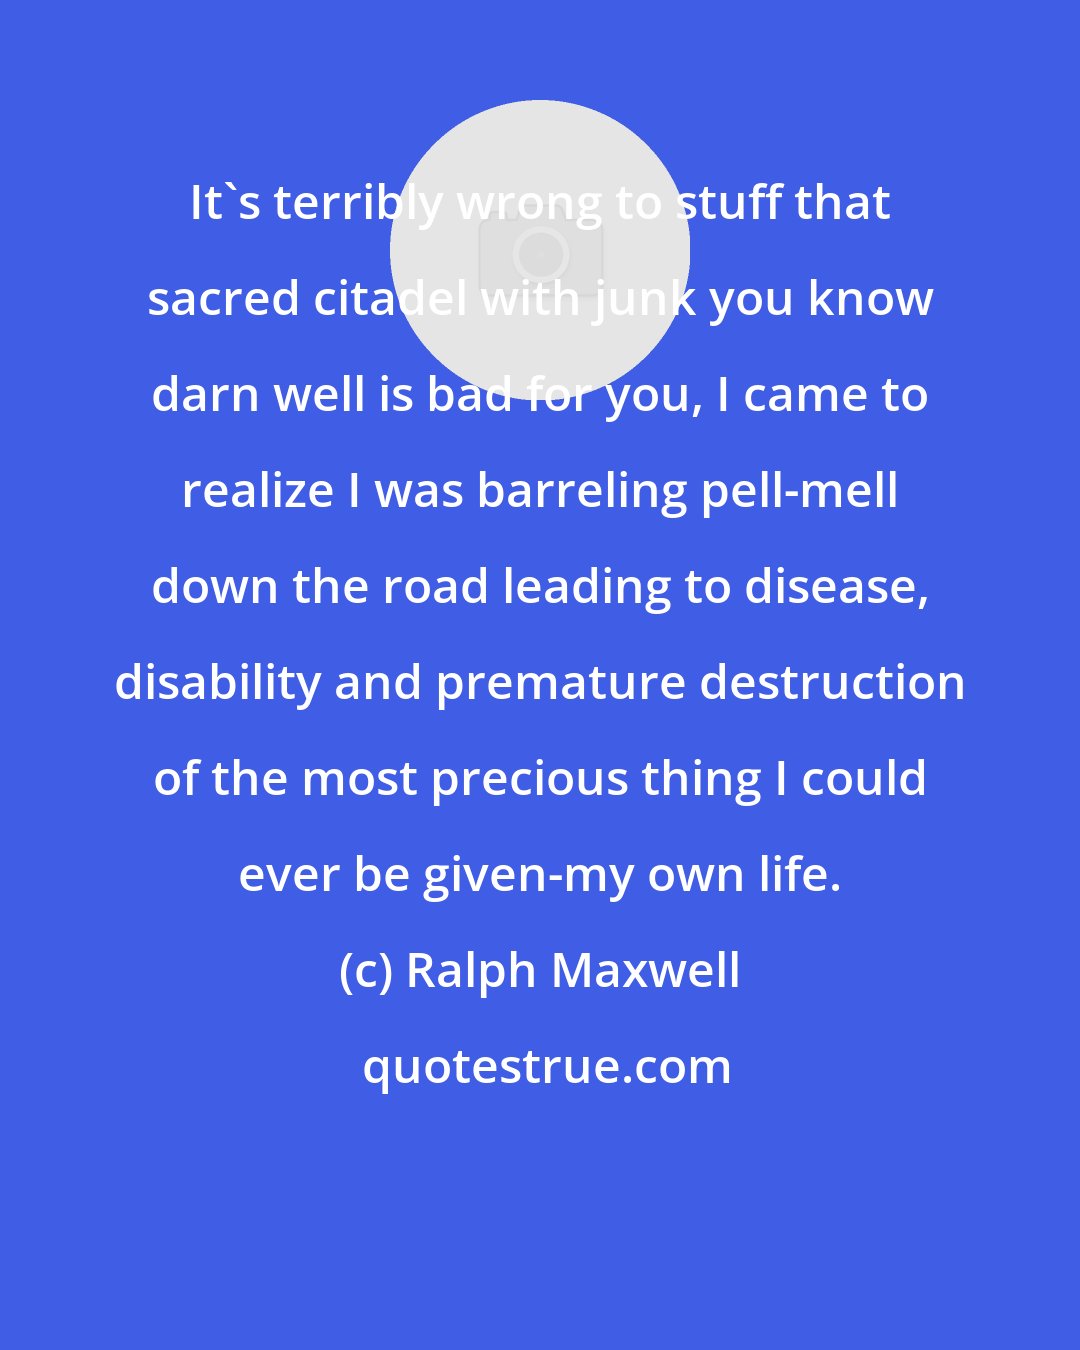 Ralph Maxwell: It's terribly wrong to stuff that sacred citadel with junk you know darn well is bad for you, I came to realize I was barreling pell-mell down the road leading to disease, disability and premature destruction of the most precious thing I could ever be given-my own life.